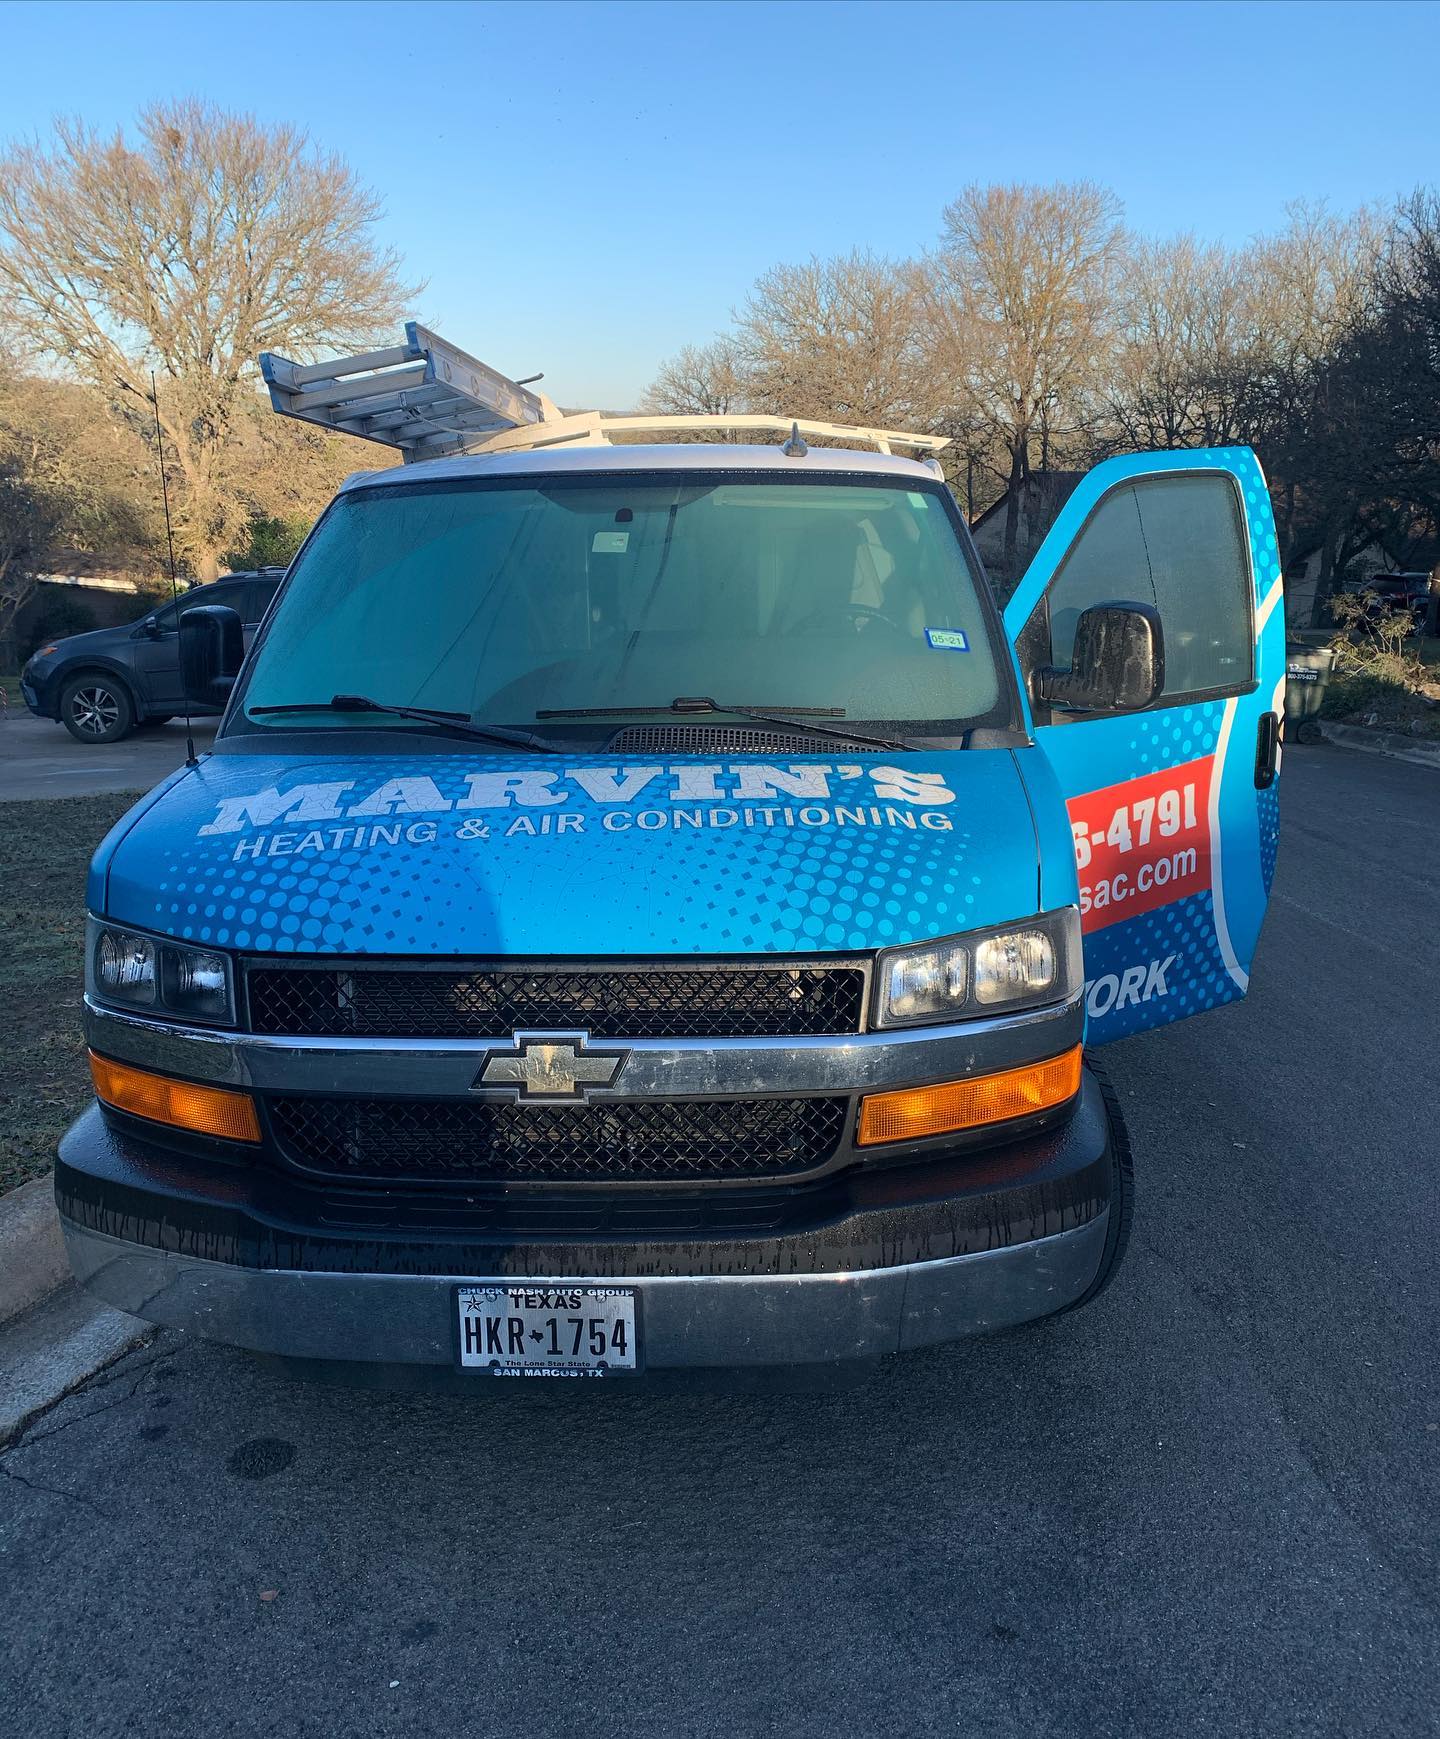 Marvin's Heating & Air Conditioning on their way to repair a heater